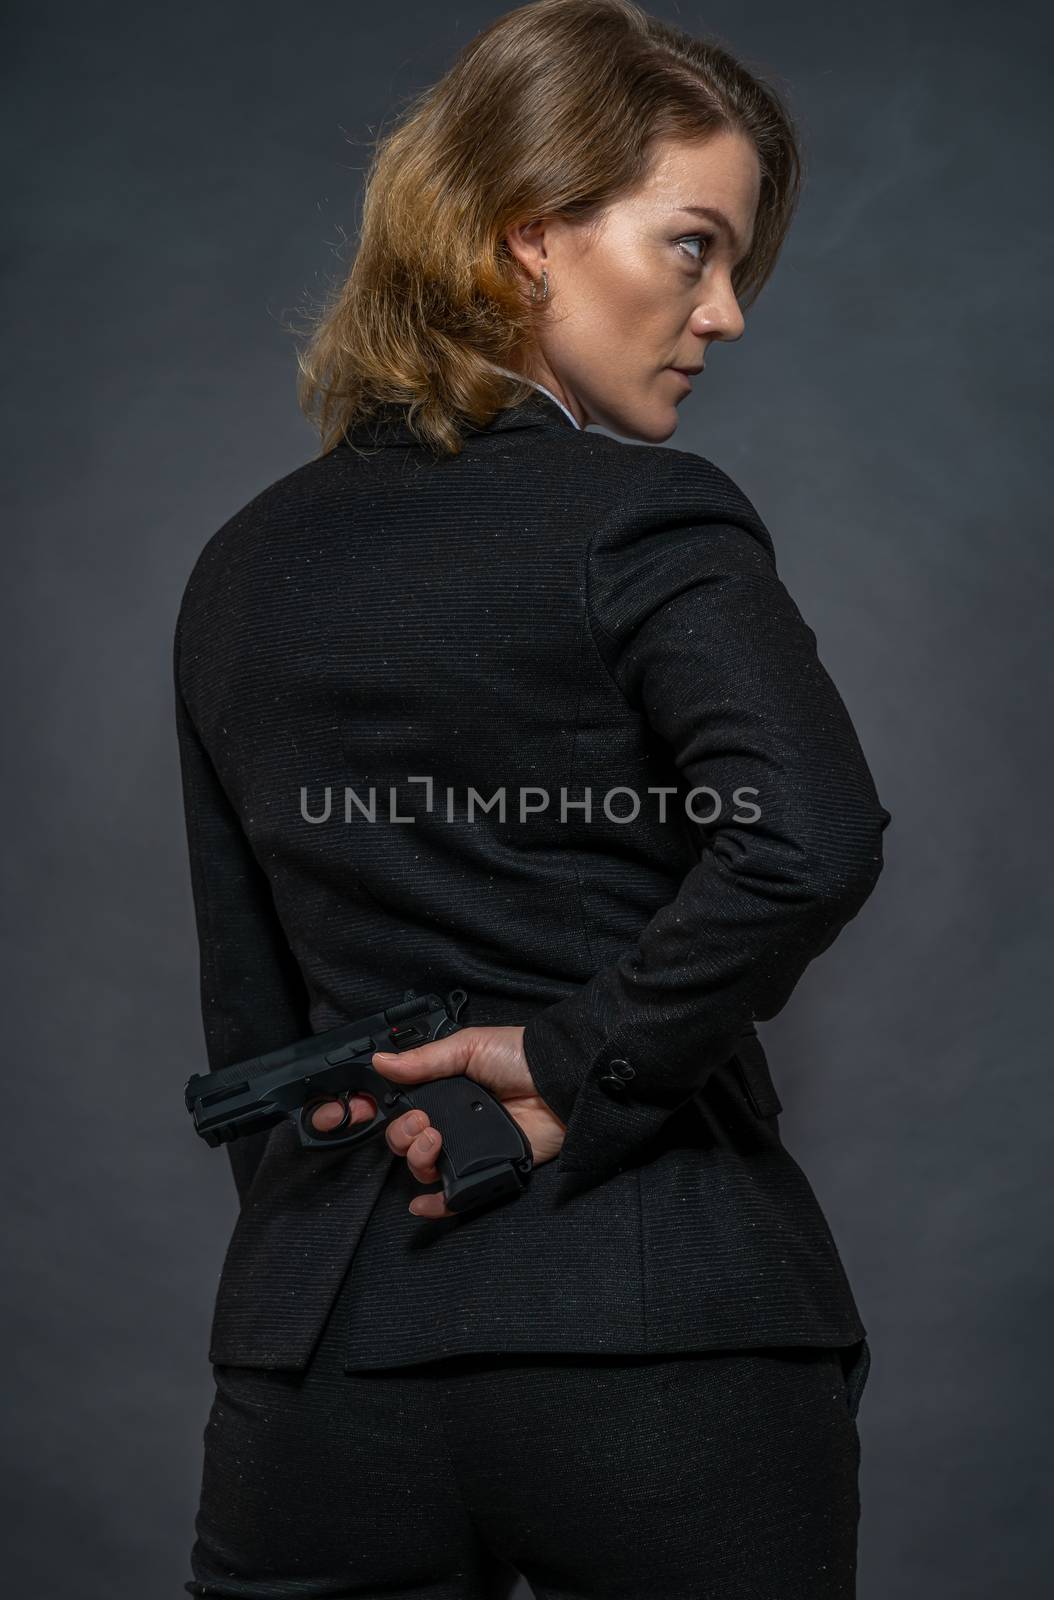 gun in hand behind the back of a woman in a suit by Edophoto